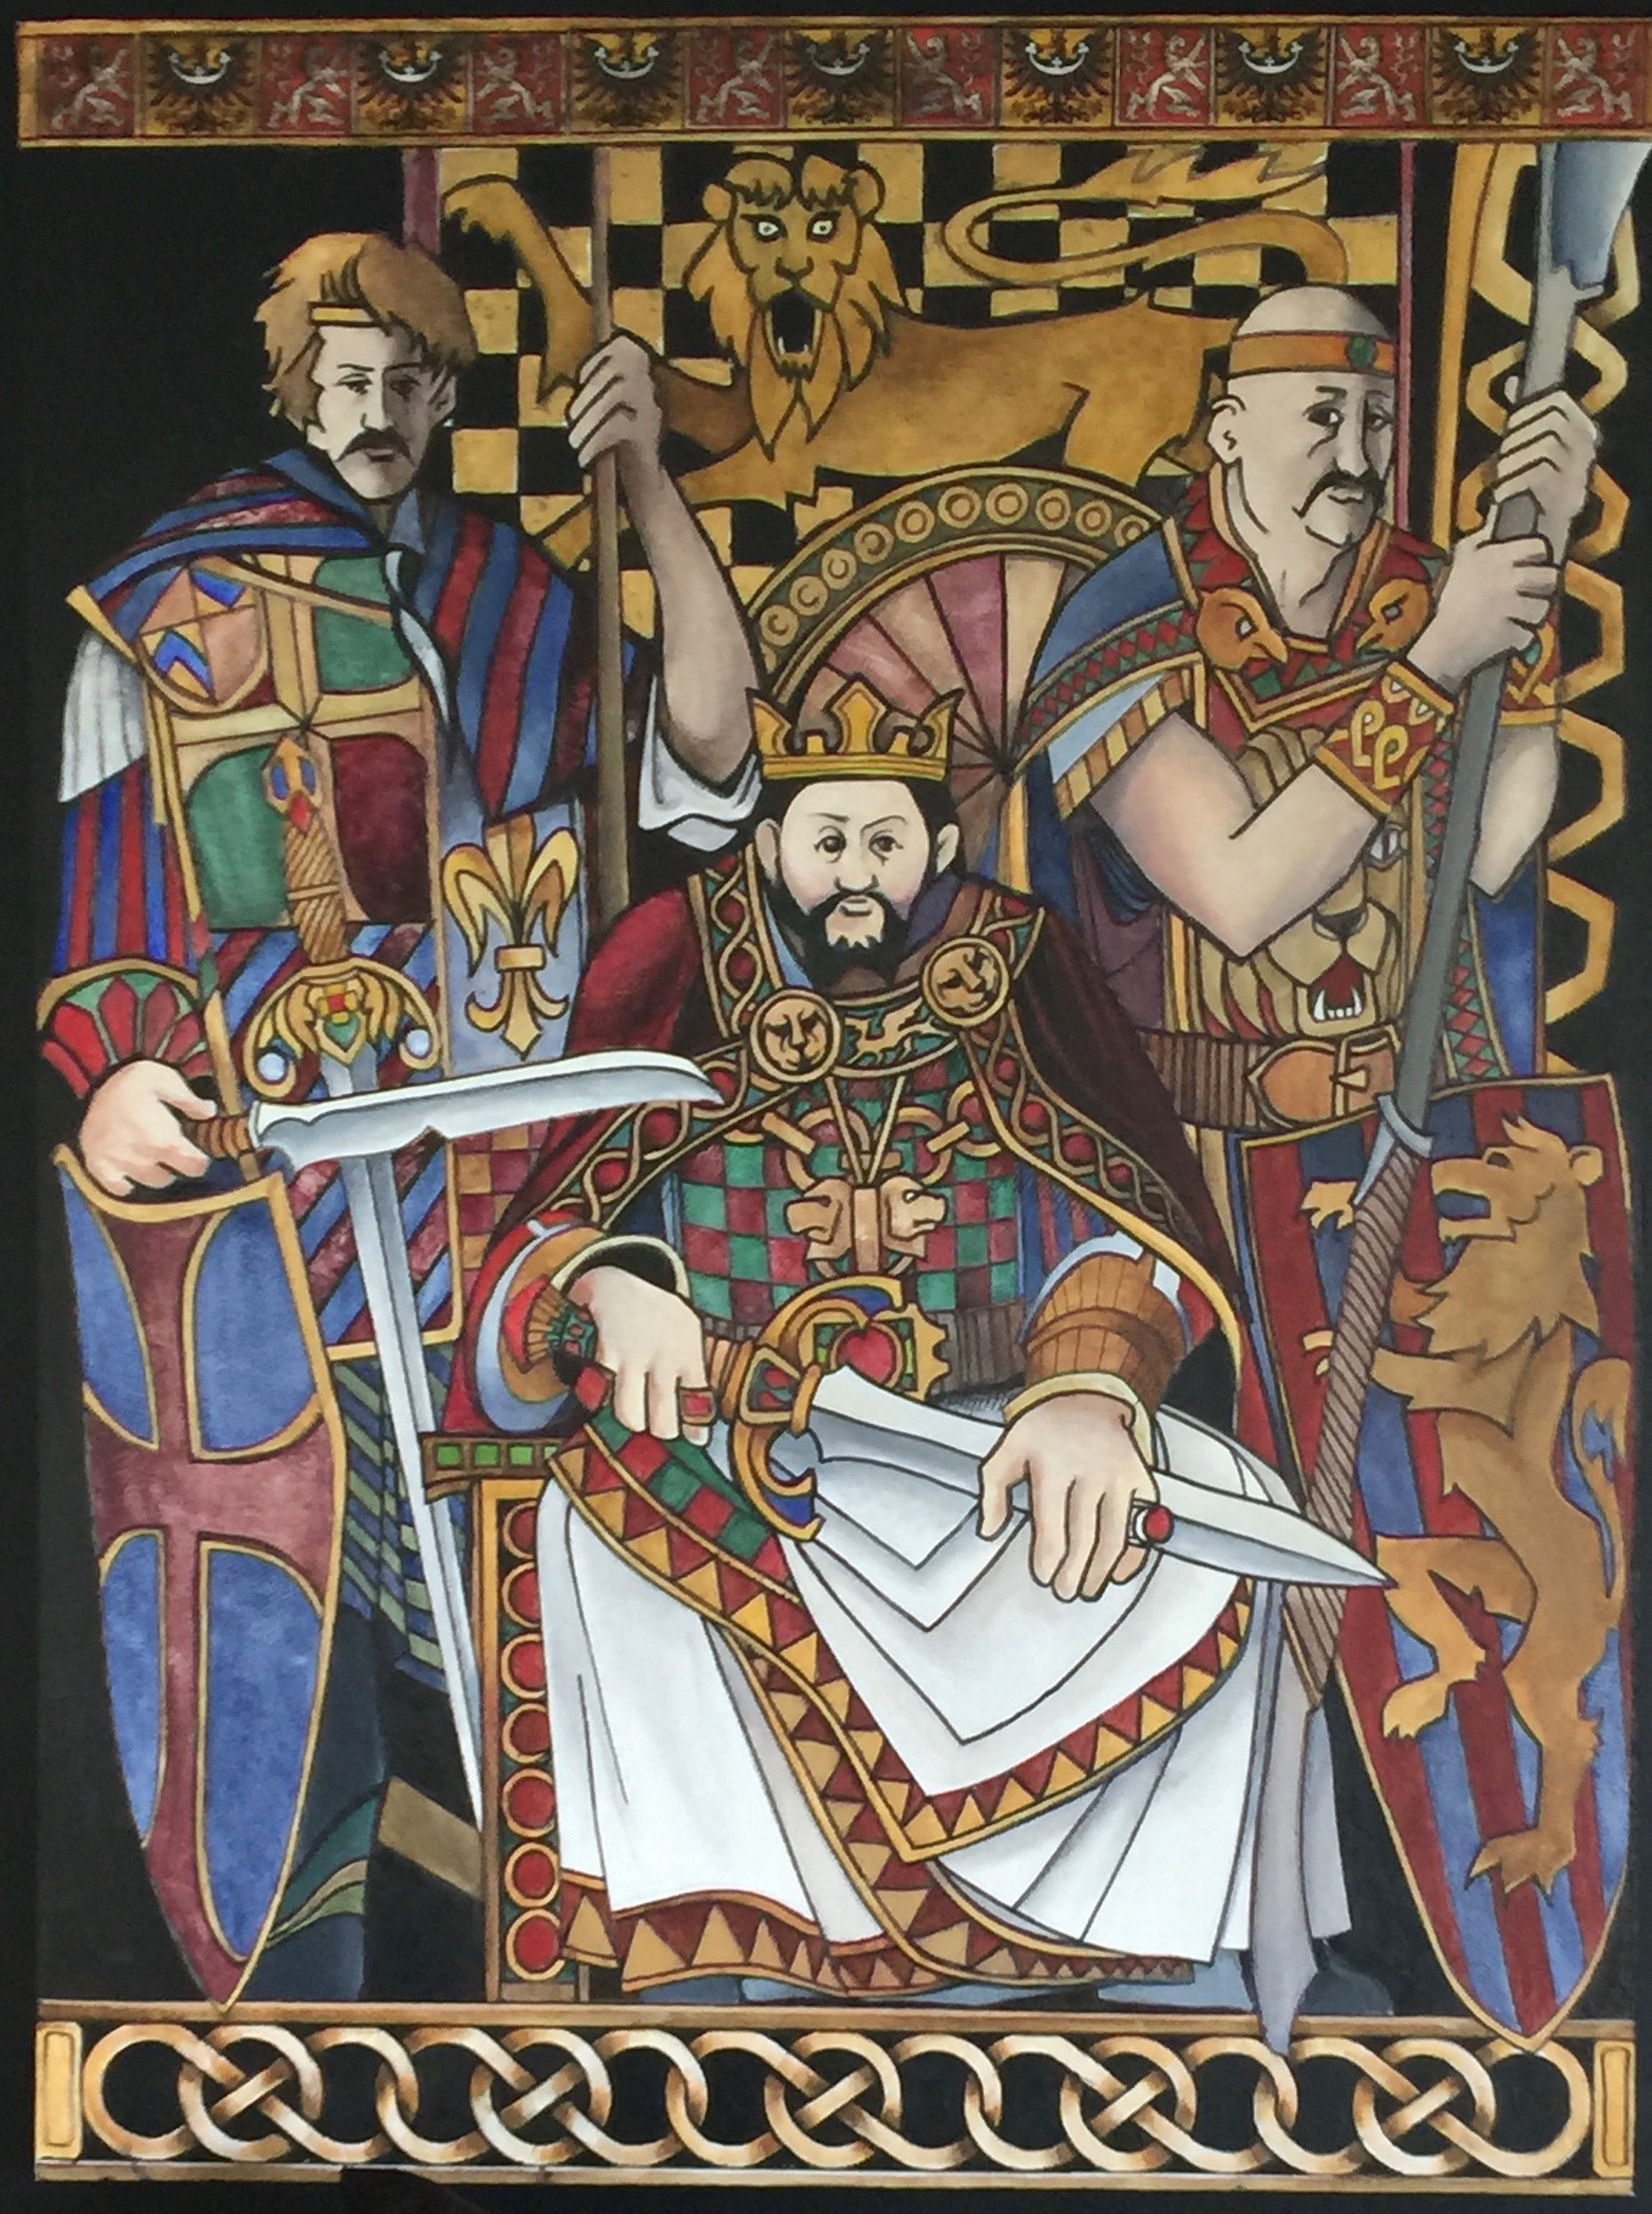 A Heraldic style painting depicting King Arthur and two Knights of the Round Table.